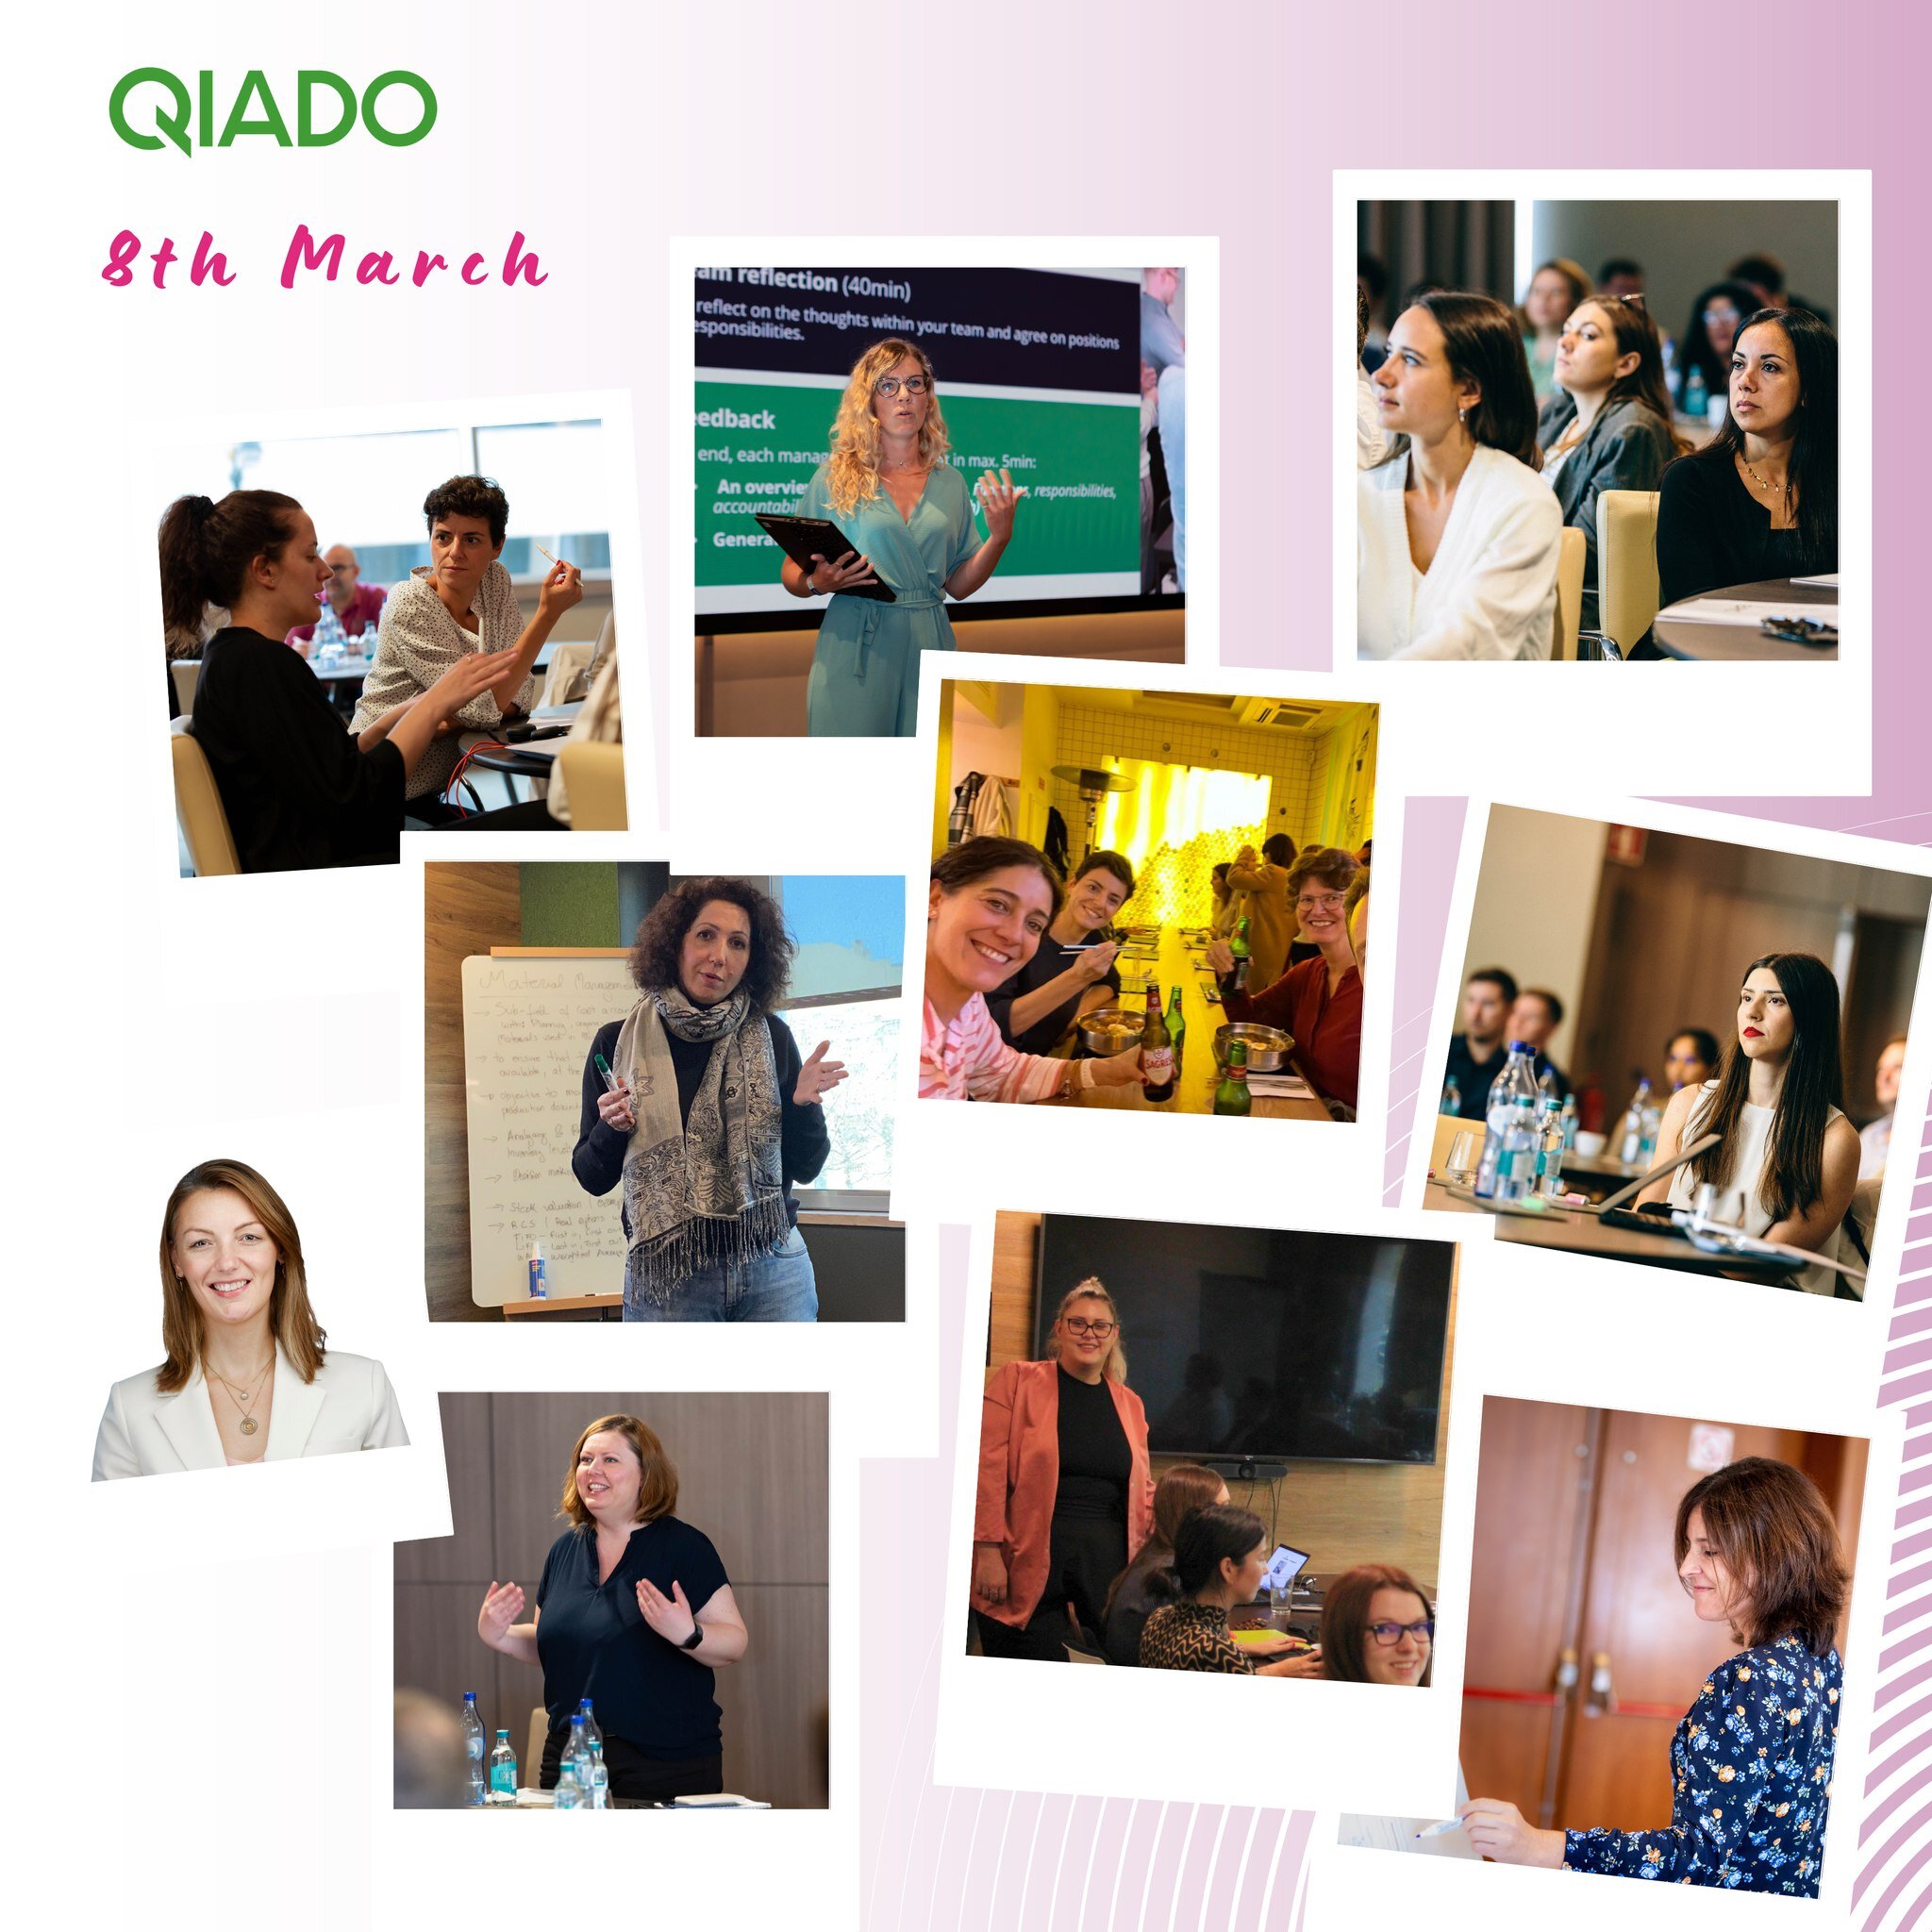 Diversity and inclusion in all dimensions are vital pillars for Qiado, including the gender perspective. 🚺 With women constituting nearly 40% of our team, we are proud to be on a positive trajectory towards fostering a truly inclusive workplace.

Fr